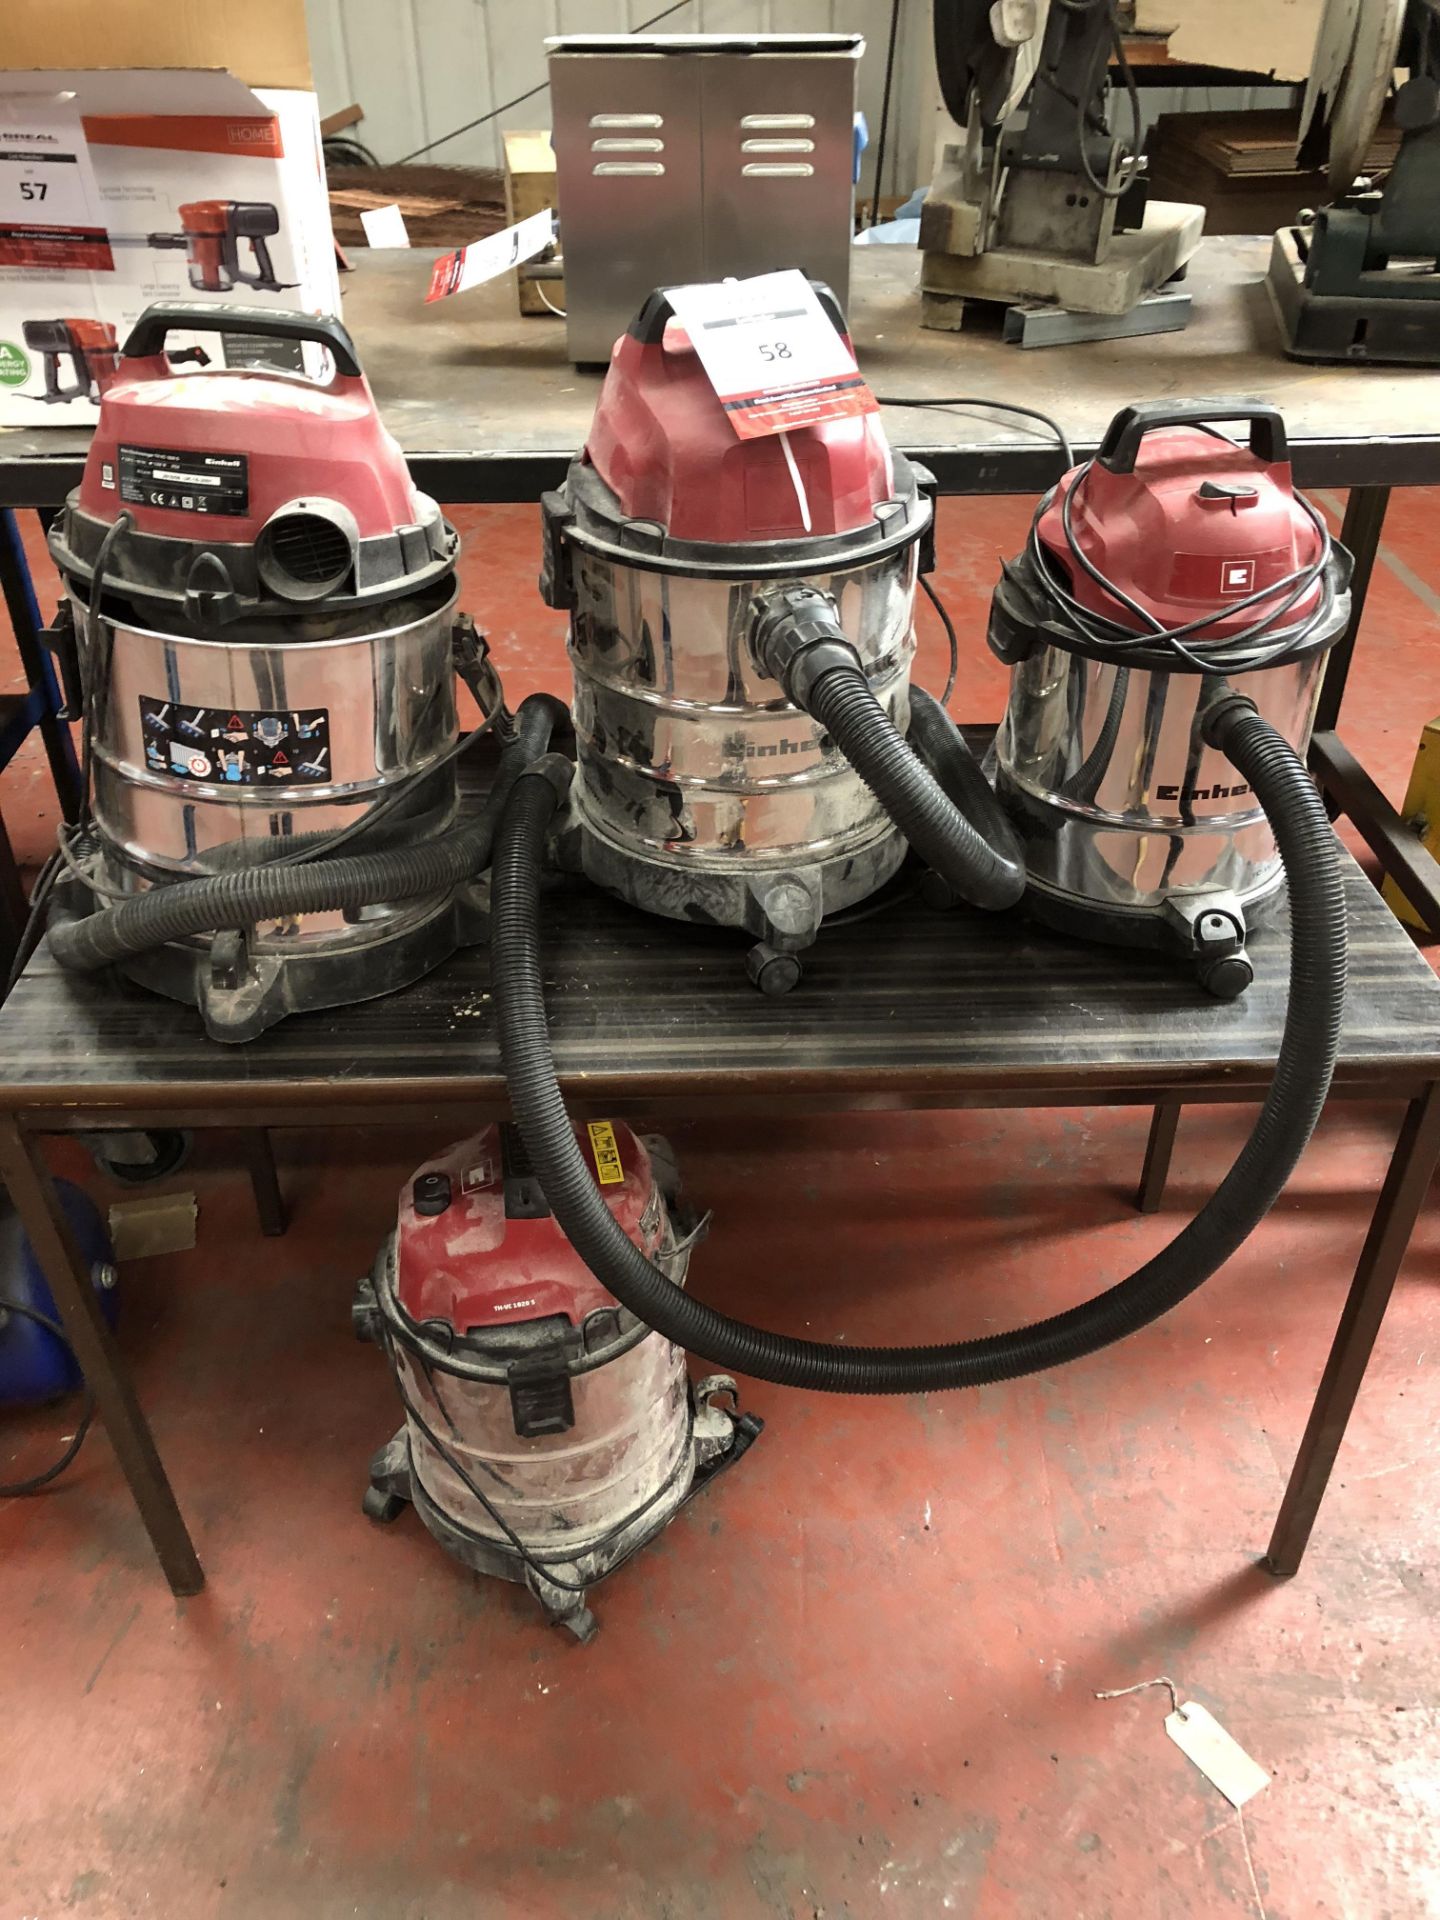 4 x Einhell Vacuum Cleaners and Table